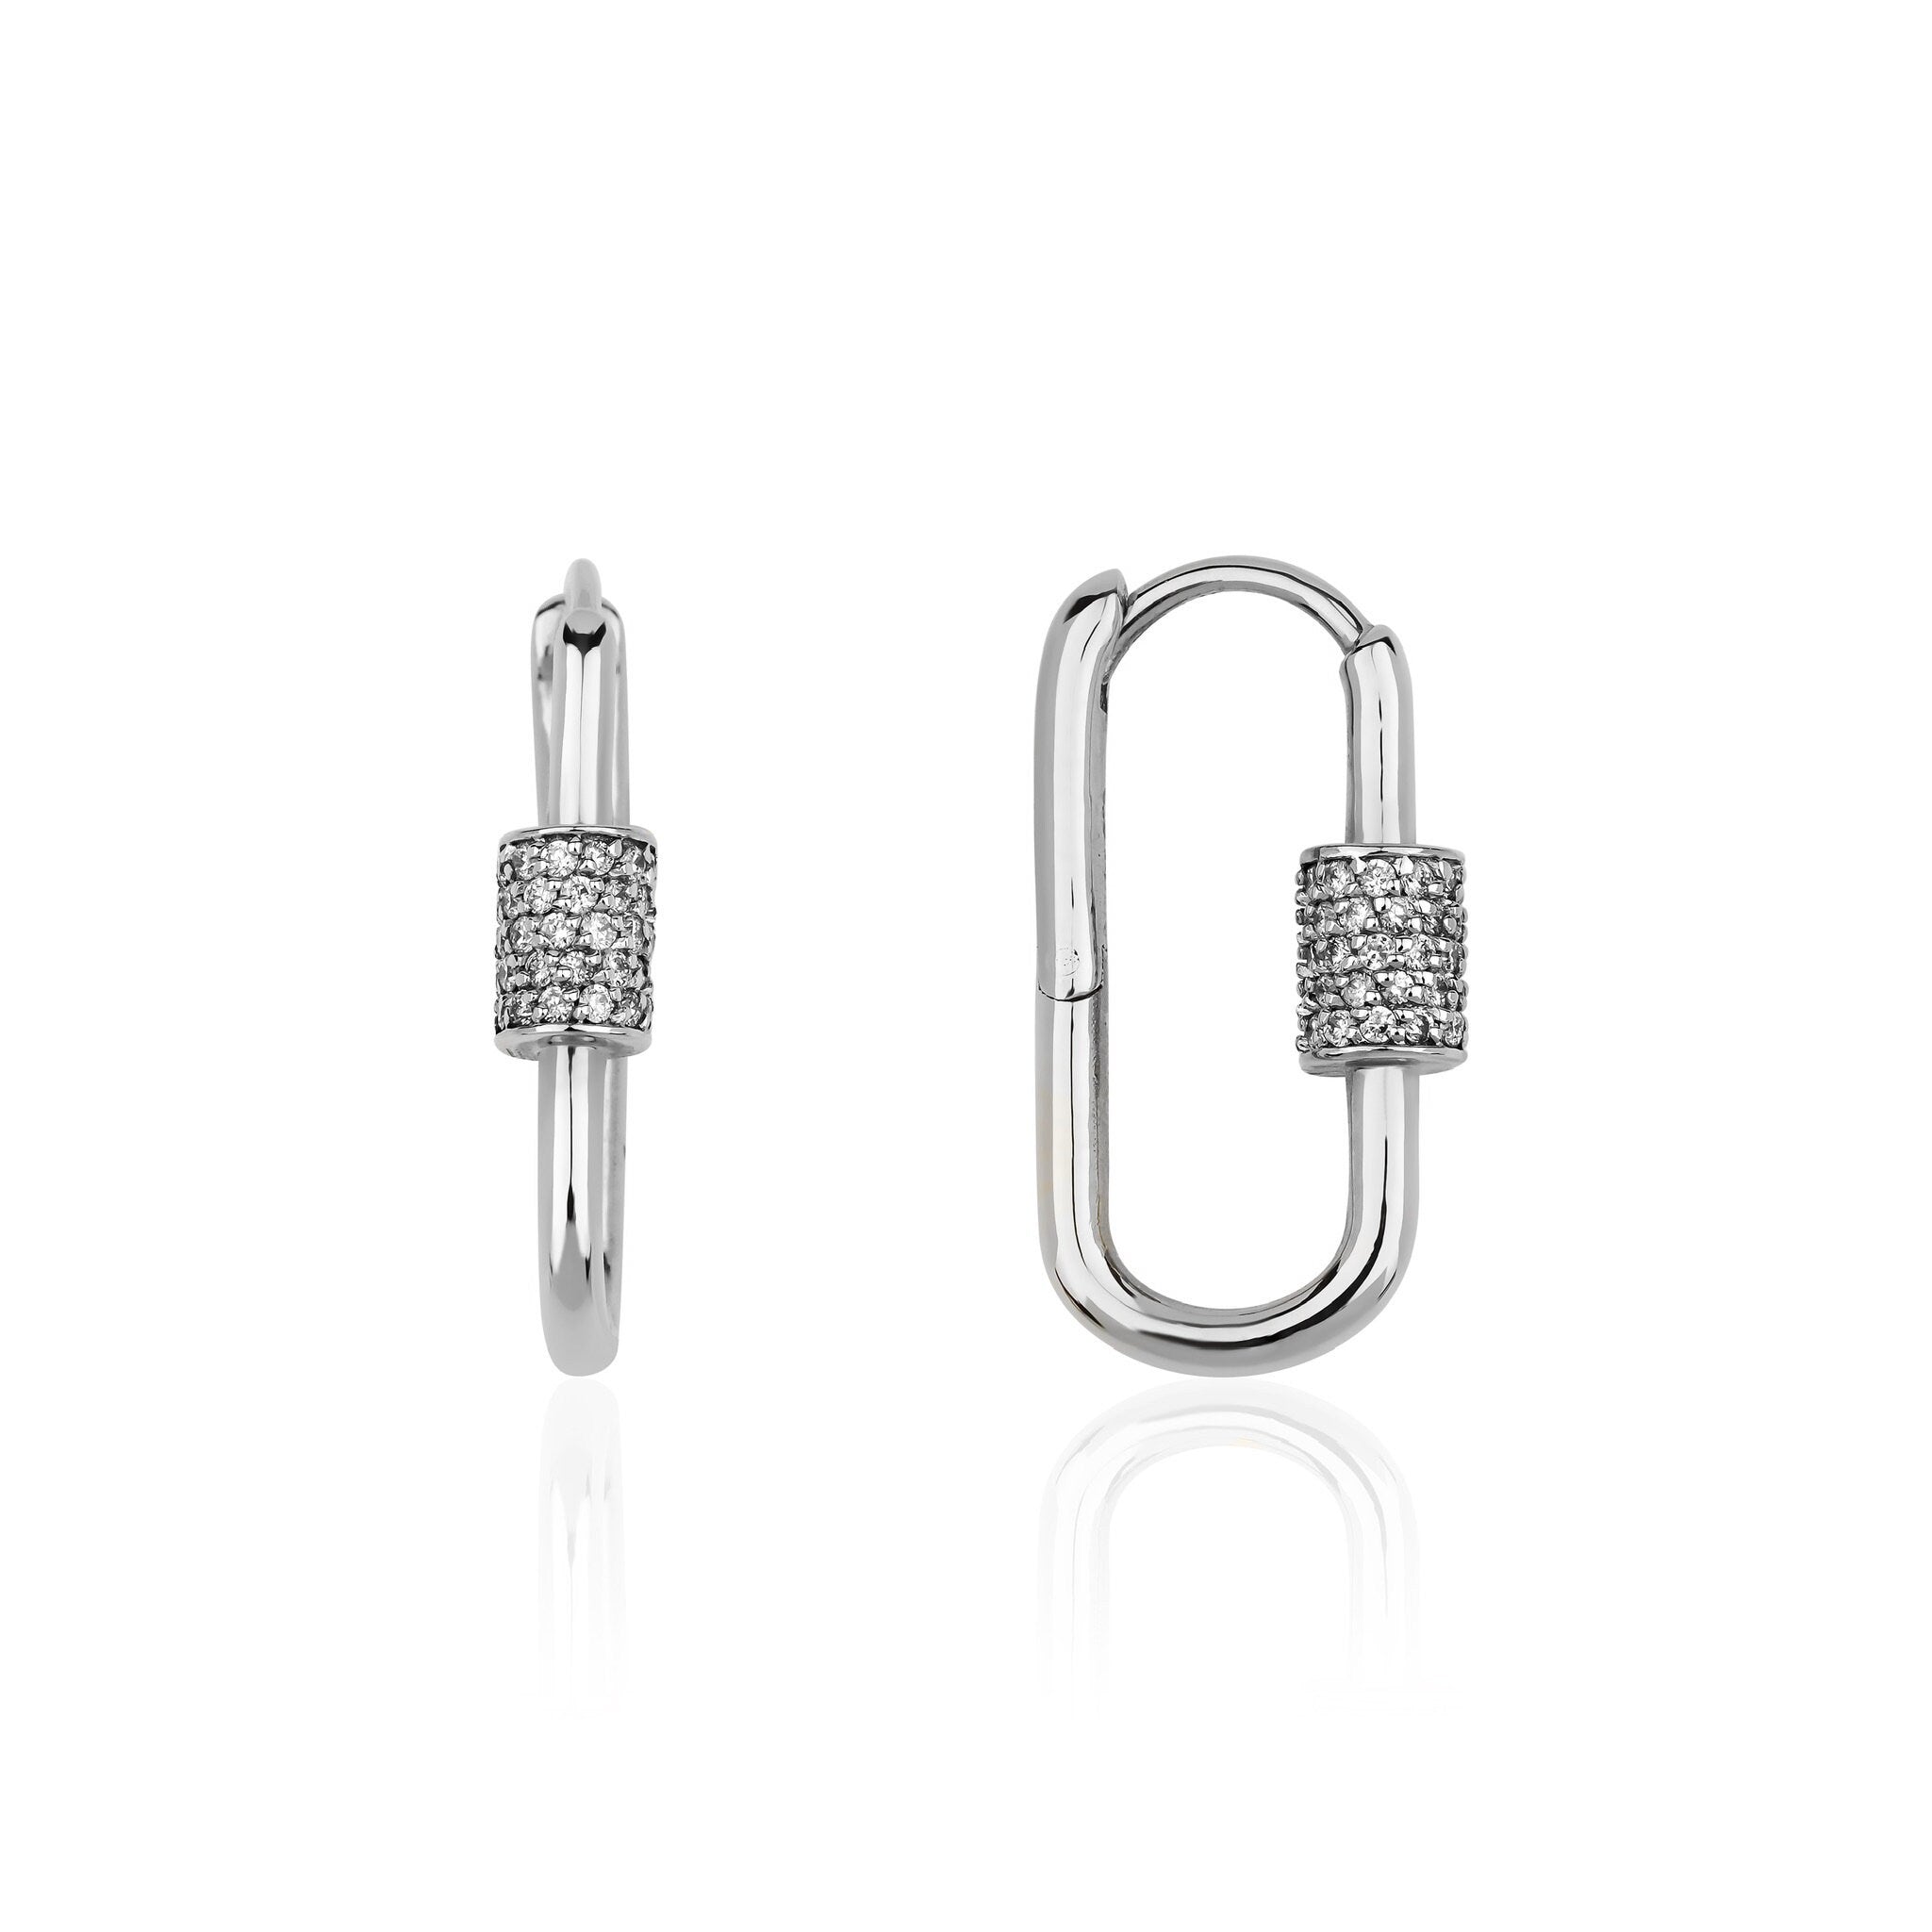 Diamond Carabiner Earrings Available in 14K and 18K Gold